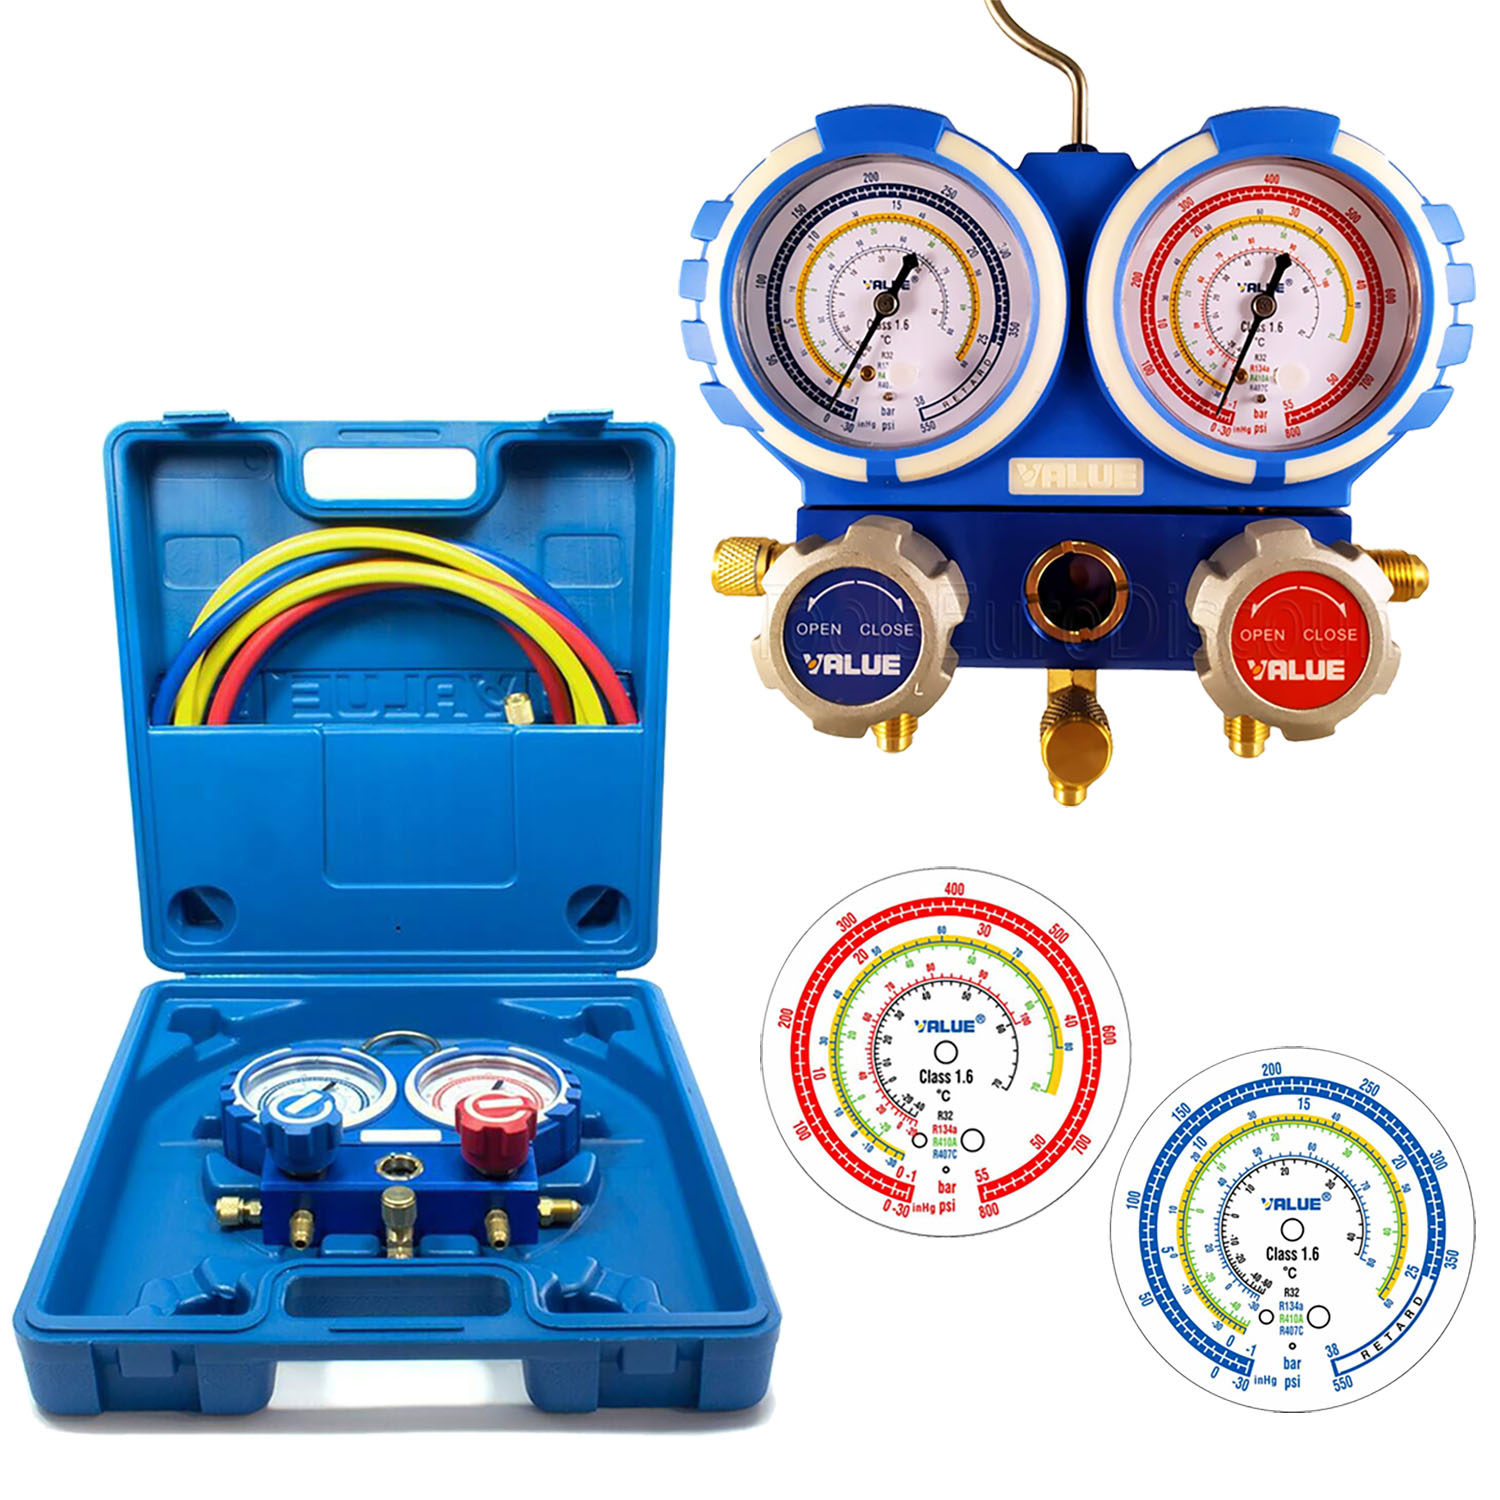 VMG-2-R32-B Manifold Gauge (analogic) - 2 ways - gauges dia. 68 mm. - residential A/C (R32, R410A, R407C) in blow case with kit 3 hoses length 120 cm. - declaration of conformity with serial number of the instrument supplied